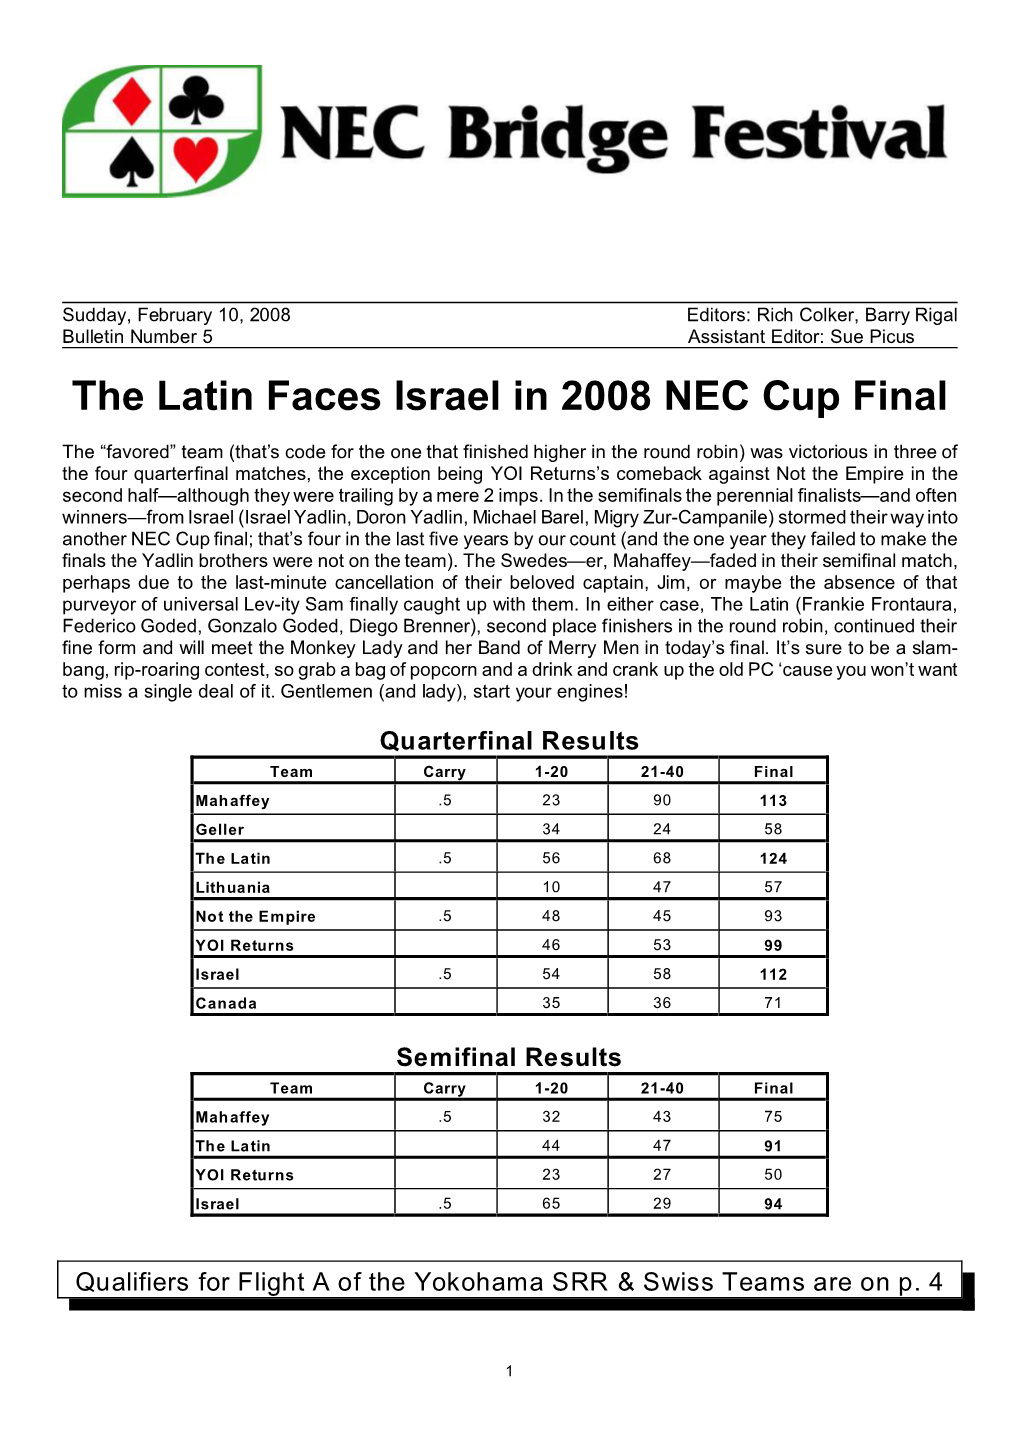 The Latin Faces Israel in 2008 NEC Cup Final